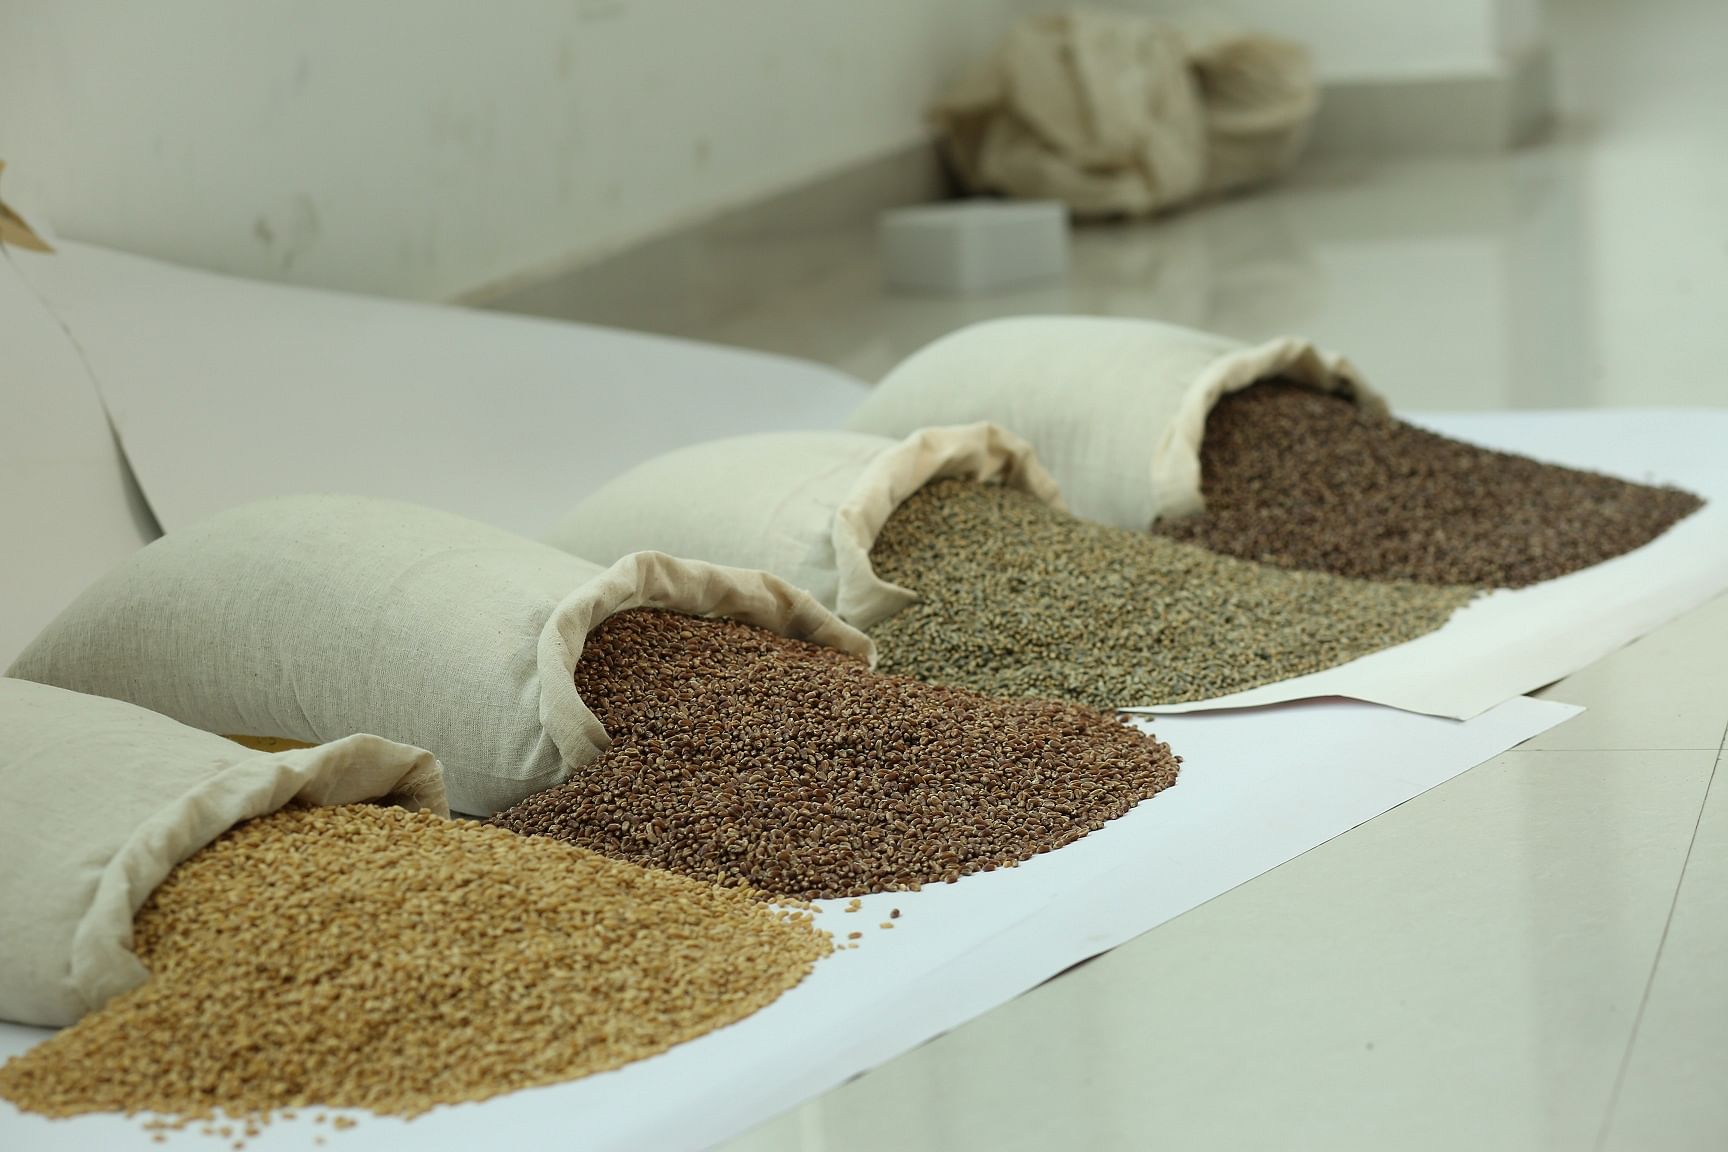 Three varieties of coloured wheat — purple, blue and black, along with the white variety. NABI